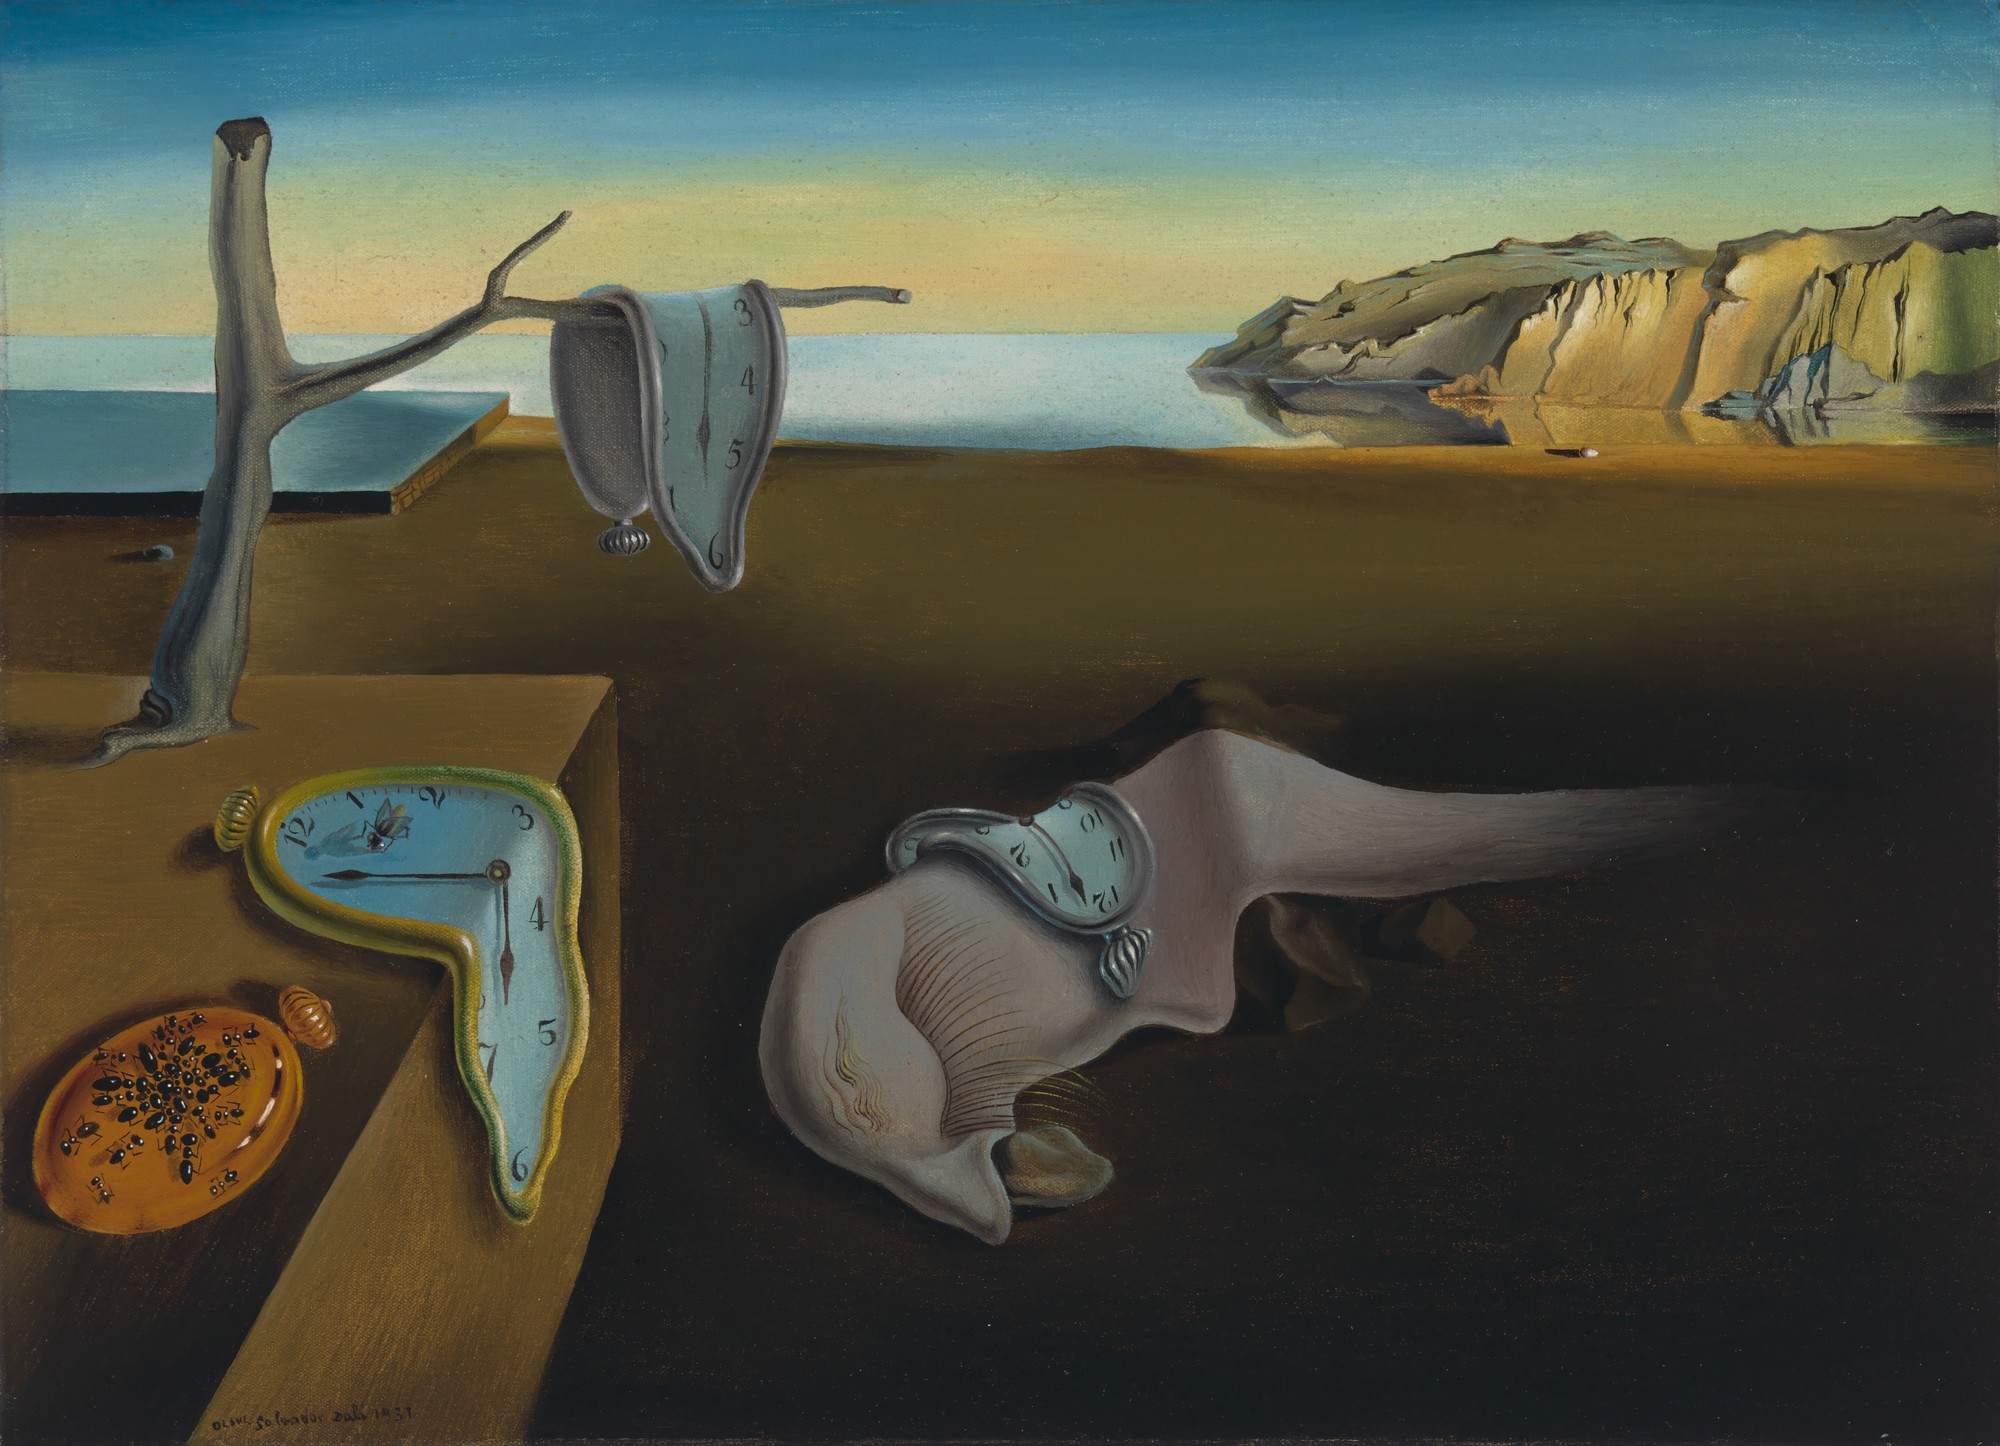 Dali surrealist painting Persistence of Memory with pictures of melting / warped clocks